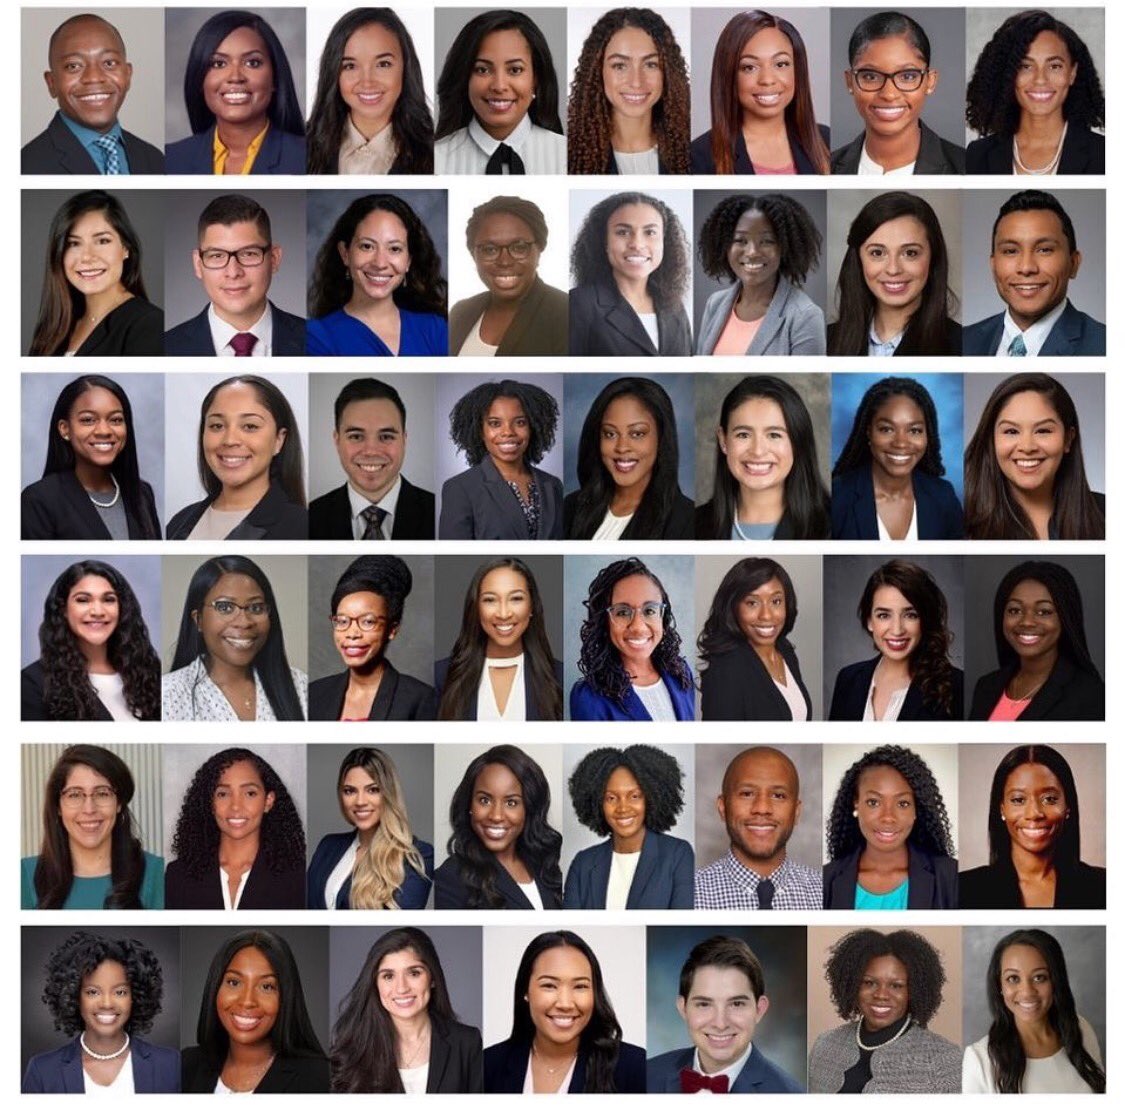 Congrats to all 47 URiMs who matched into dermatology this year! So proud of you all. Continue to thrive, break glass ceilings and pay it forward. #NMADerm #SNMAmatched #dermtwitter